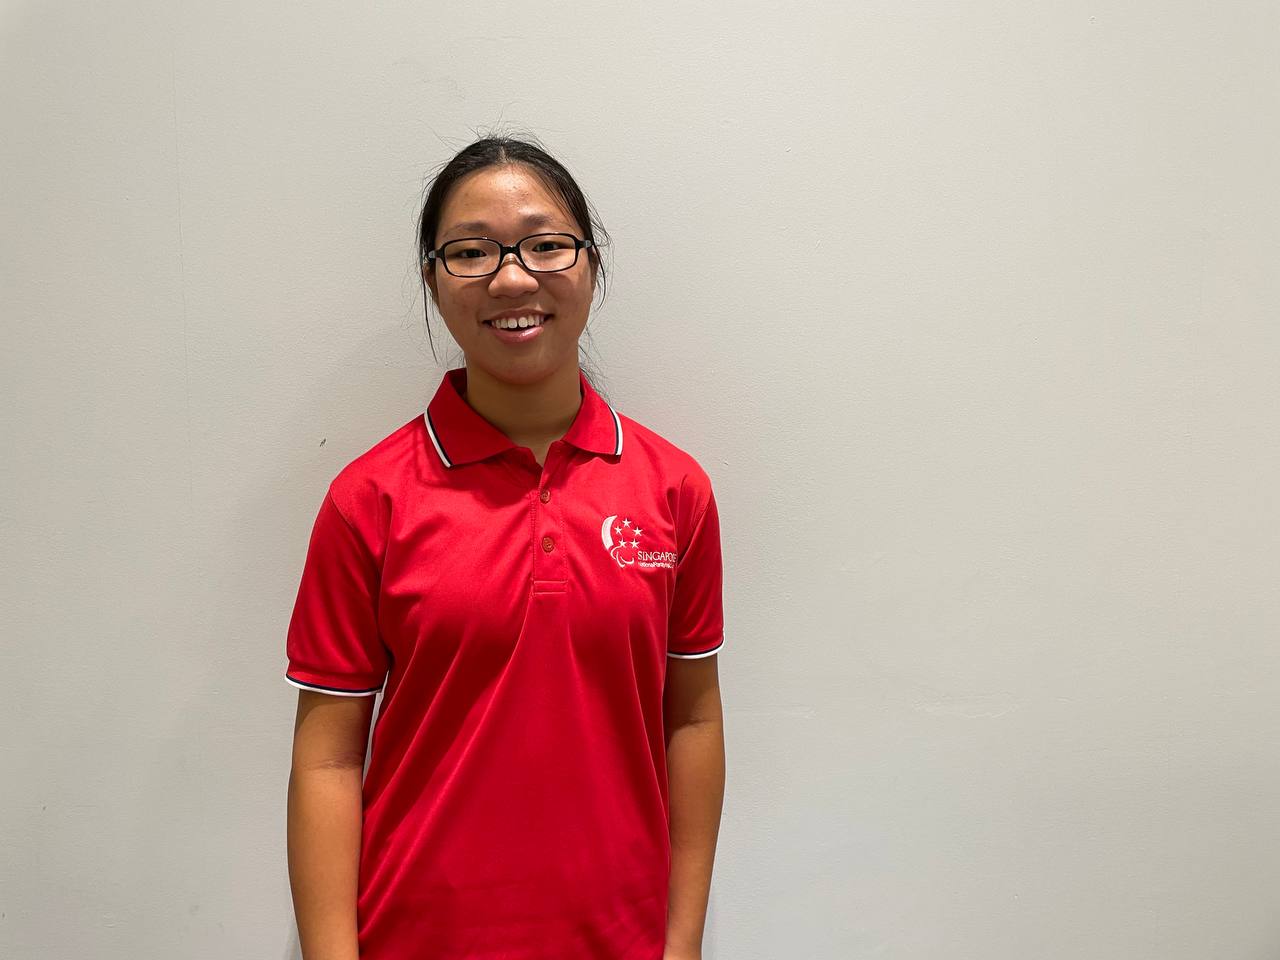 Tong smiles for the camera, dressed in a red polo t-shirt and standing in front of a white background.